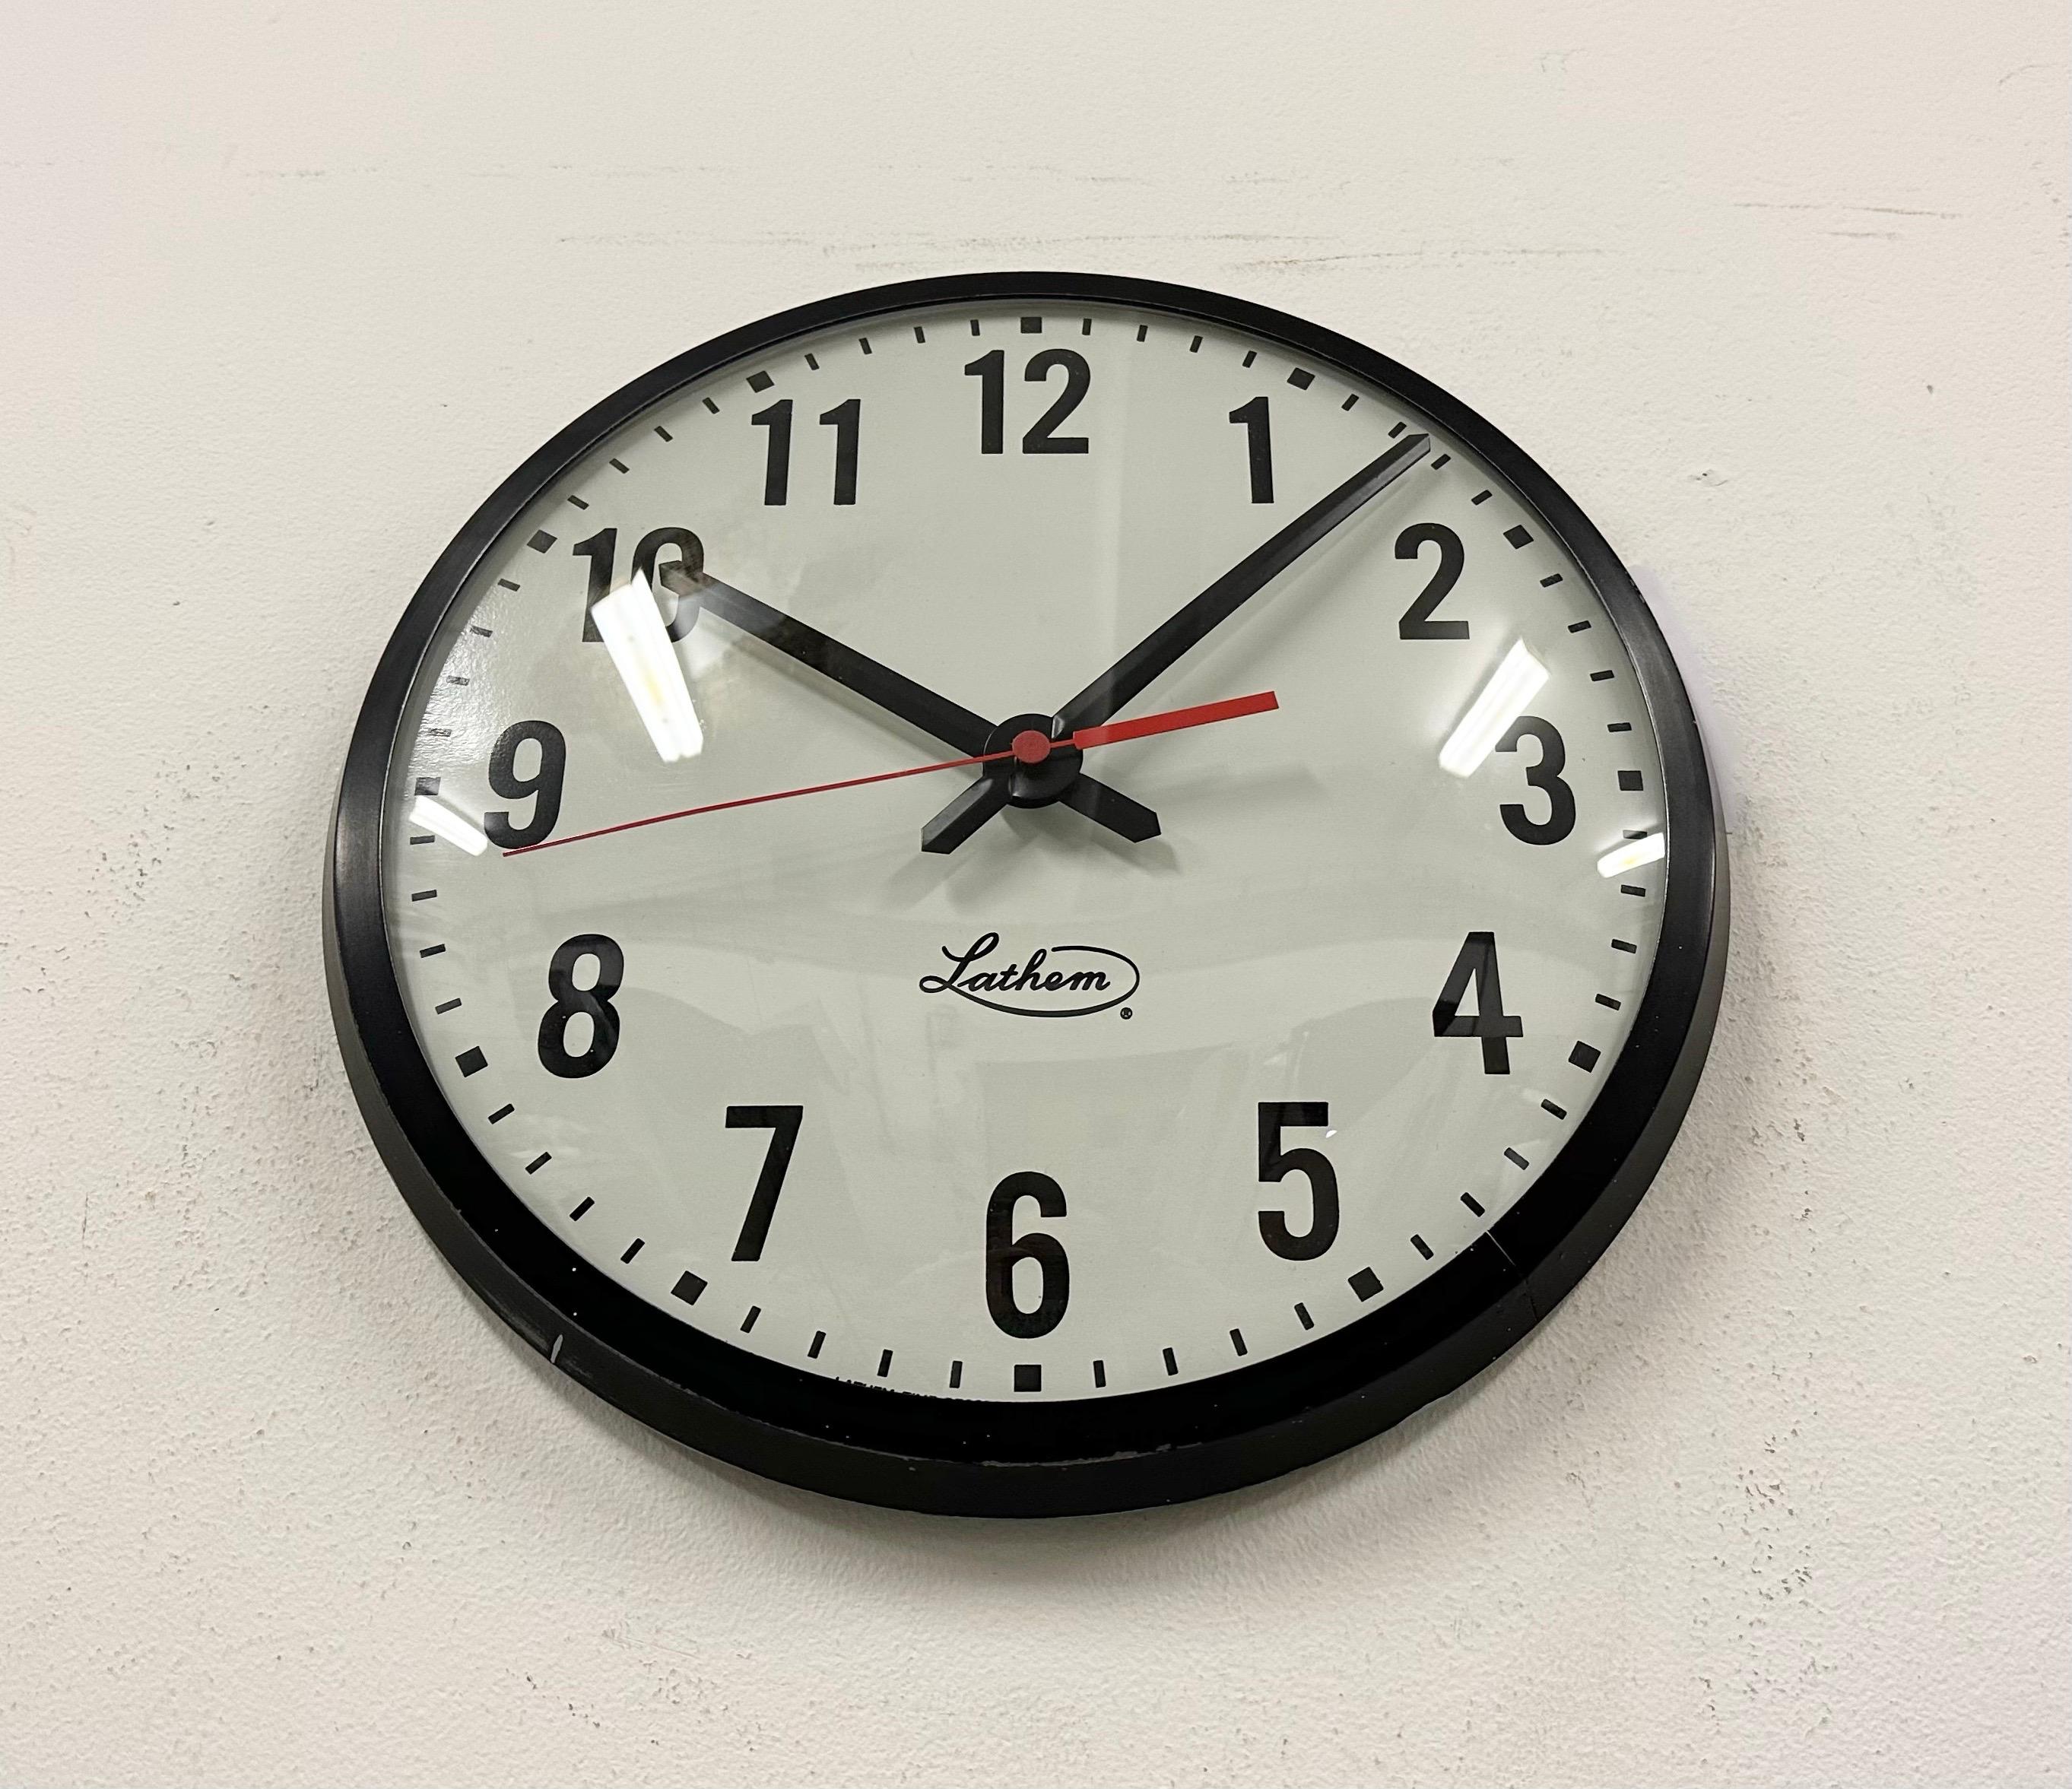 Vintage Black School Wall Clock from Lathem, 1980s In Good Condition For Sale In Kojetice, CZ